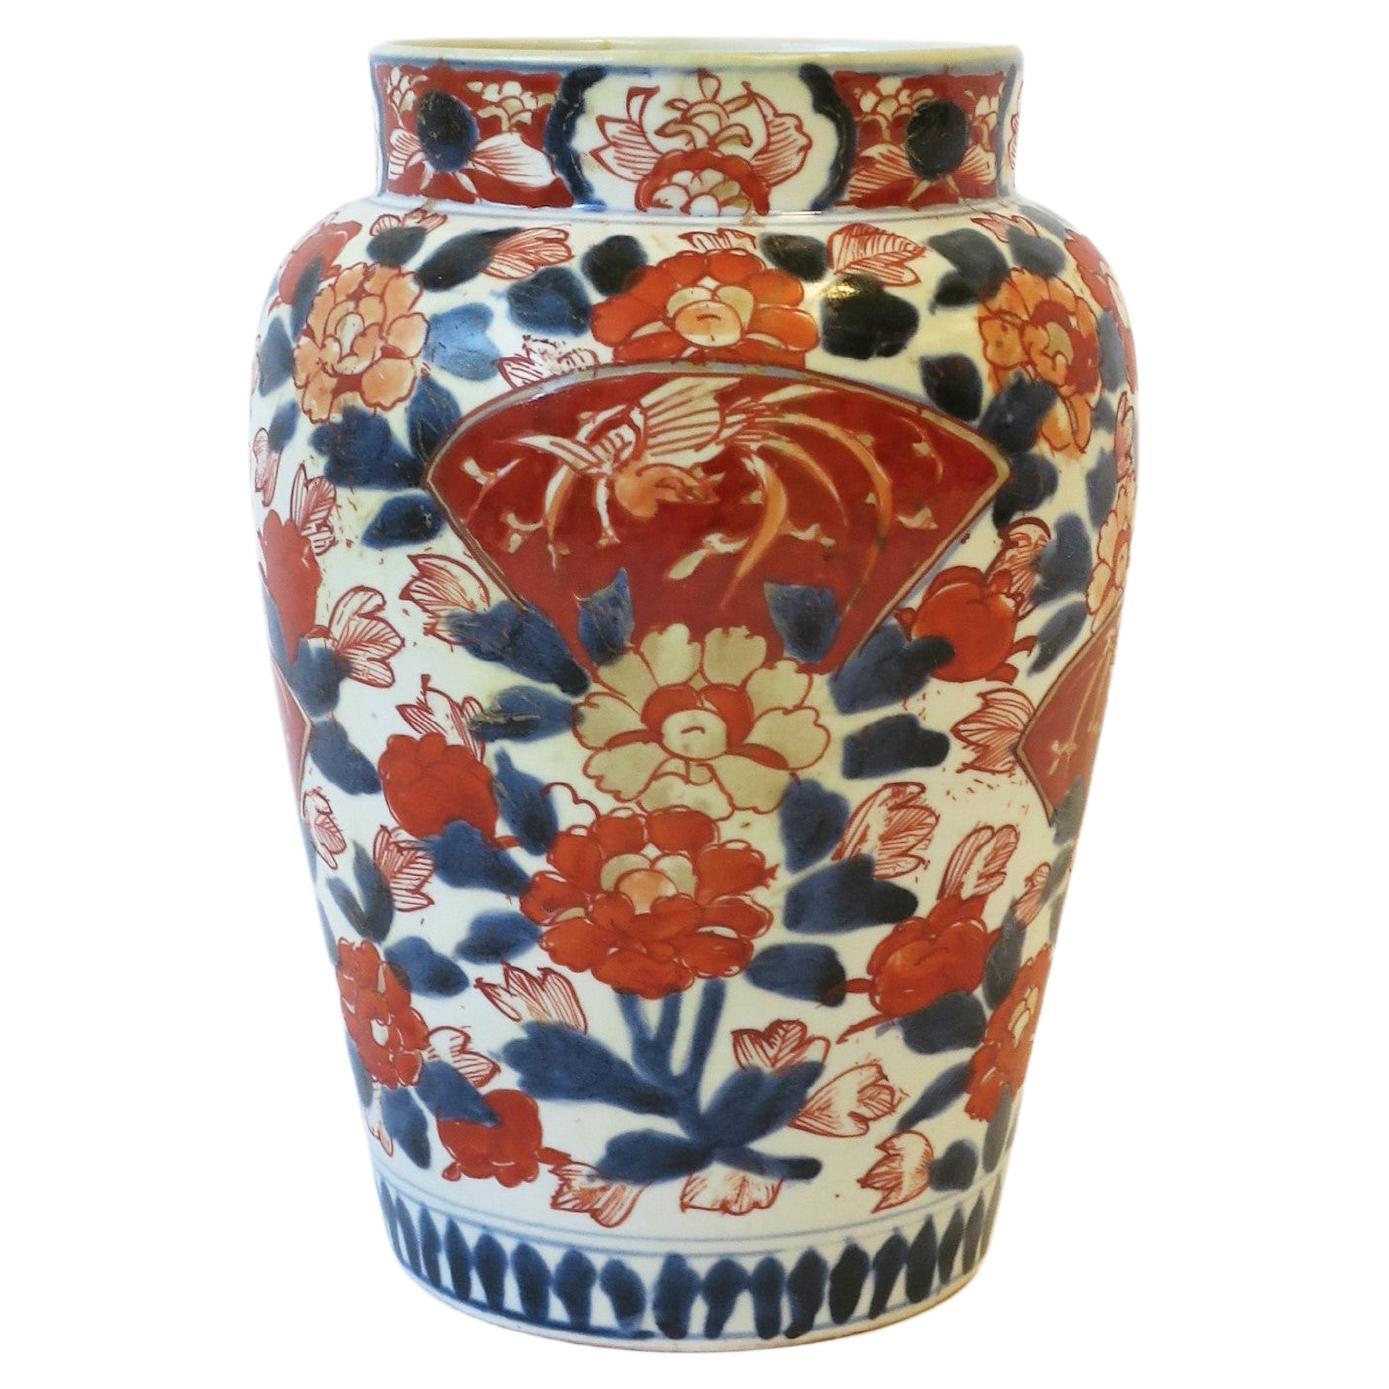 Imari White Porcelain Chinese Japanese Vase with Blue and Red, ca. 18th Century